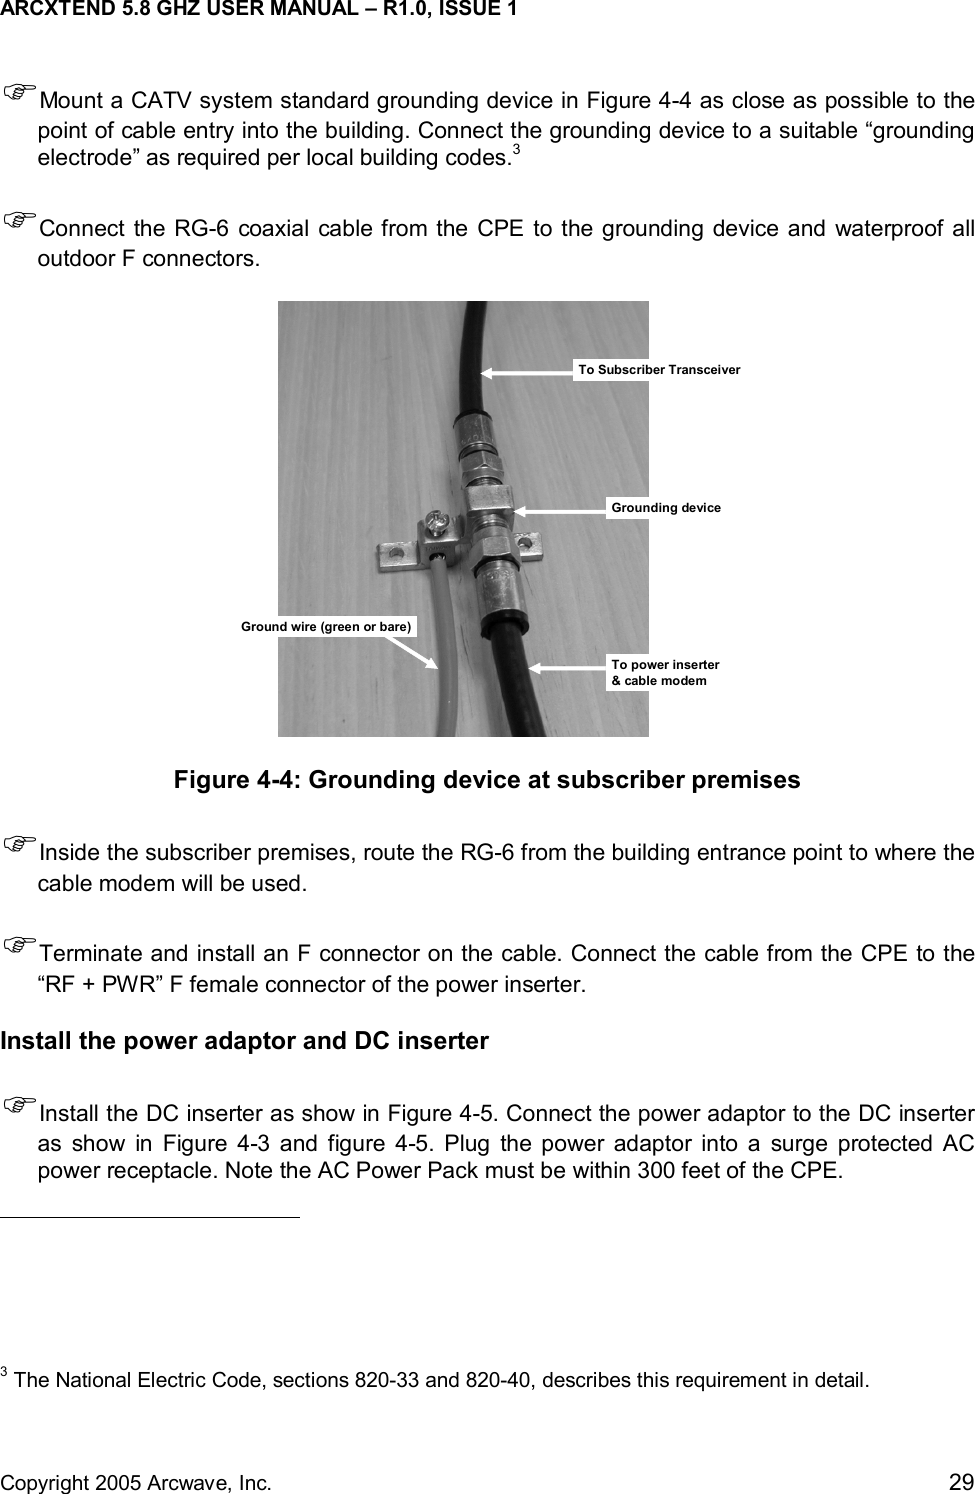 ARCXTEND 5.8 GHZ USER MANUAL – R1.0, ISSUE 1  Copyright 2005 Arcwave, Inc.    29 )Mount a CATV system standard grounding device in Figure 4-4 as close as possible to the point of cable entry into the building. Connect the grounding device to a suitable “grounding electrode” as required per local building codes.3  )Connect the RG-6 coaxial cable from the CPE to the grounding device and waterproof all outdoor F connectors. To Subscriber TransceiverGrounding deviceGround wire (green or bare)To power inserter&amp; cable modem Figure 4-4: Grounding device at subscriber premises )Inside the subscriber premises, route the RG-6 from the building entrance point to where the cable modem will be used. )Terminate and install an F connector on the cable. Connect the cable from the CPE to the “RF + PWR” F female connector of the power inserter.   Install the power adaptor and DC inserter )Install the DC inserter as show in Figure 4-5. Connect the power adaptor to the DC inserter as show in Figure 4-3 and figure 4-5. Plug the power adaptor into a surge protected AC power receptacle. Note the AC Power Pack must be within 300 feet of the CPE.                                                    3 The National Electric Code, sections 820-33 and 820-40, describes this requirement in detail. 